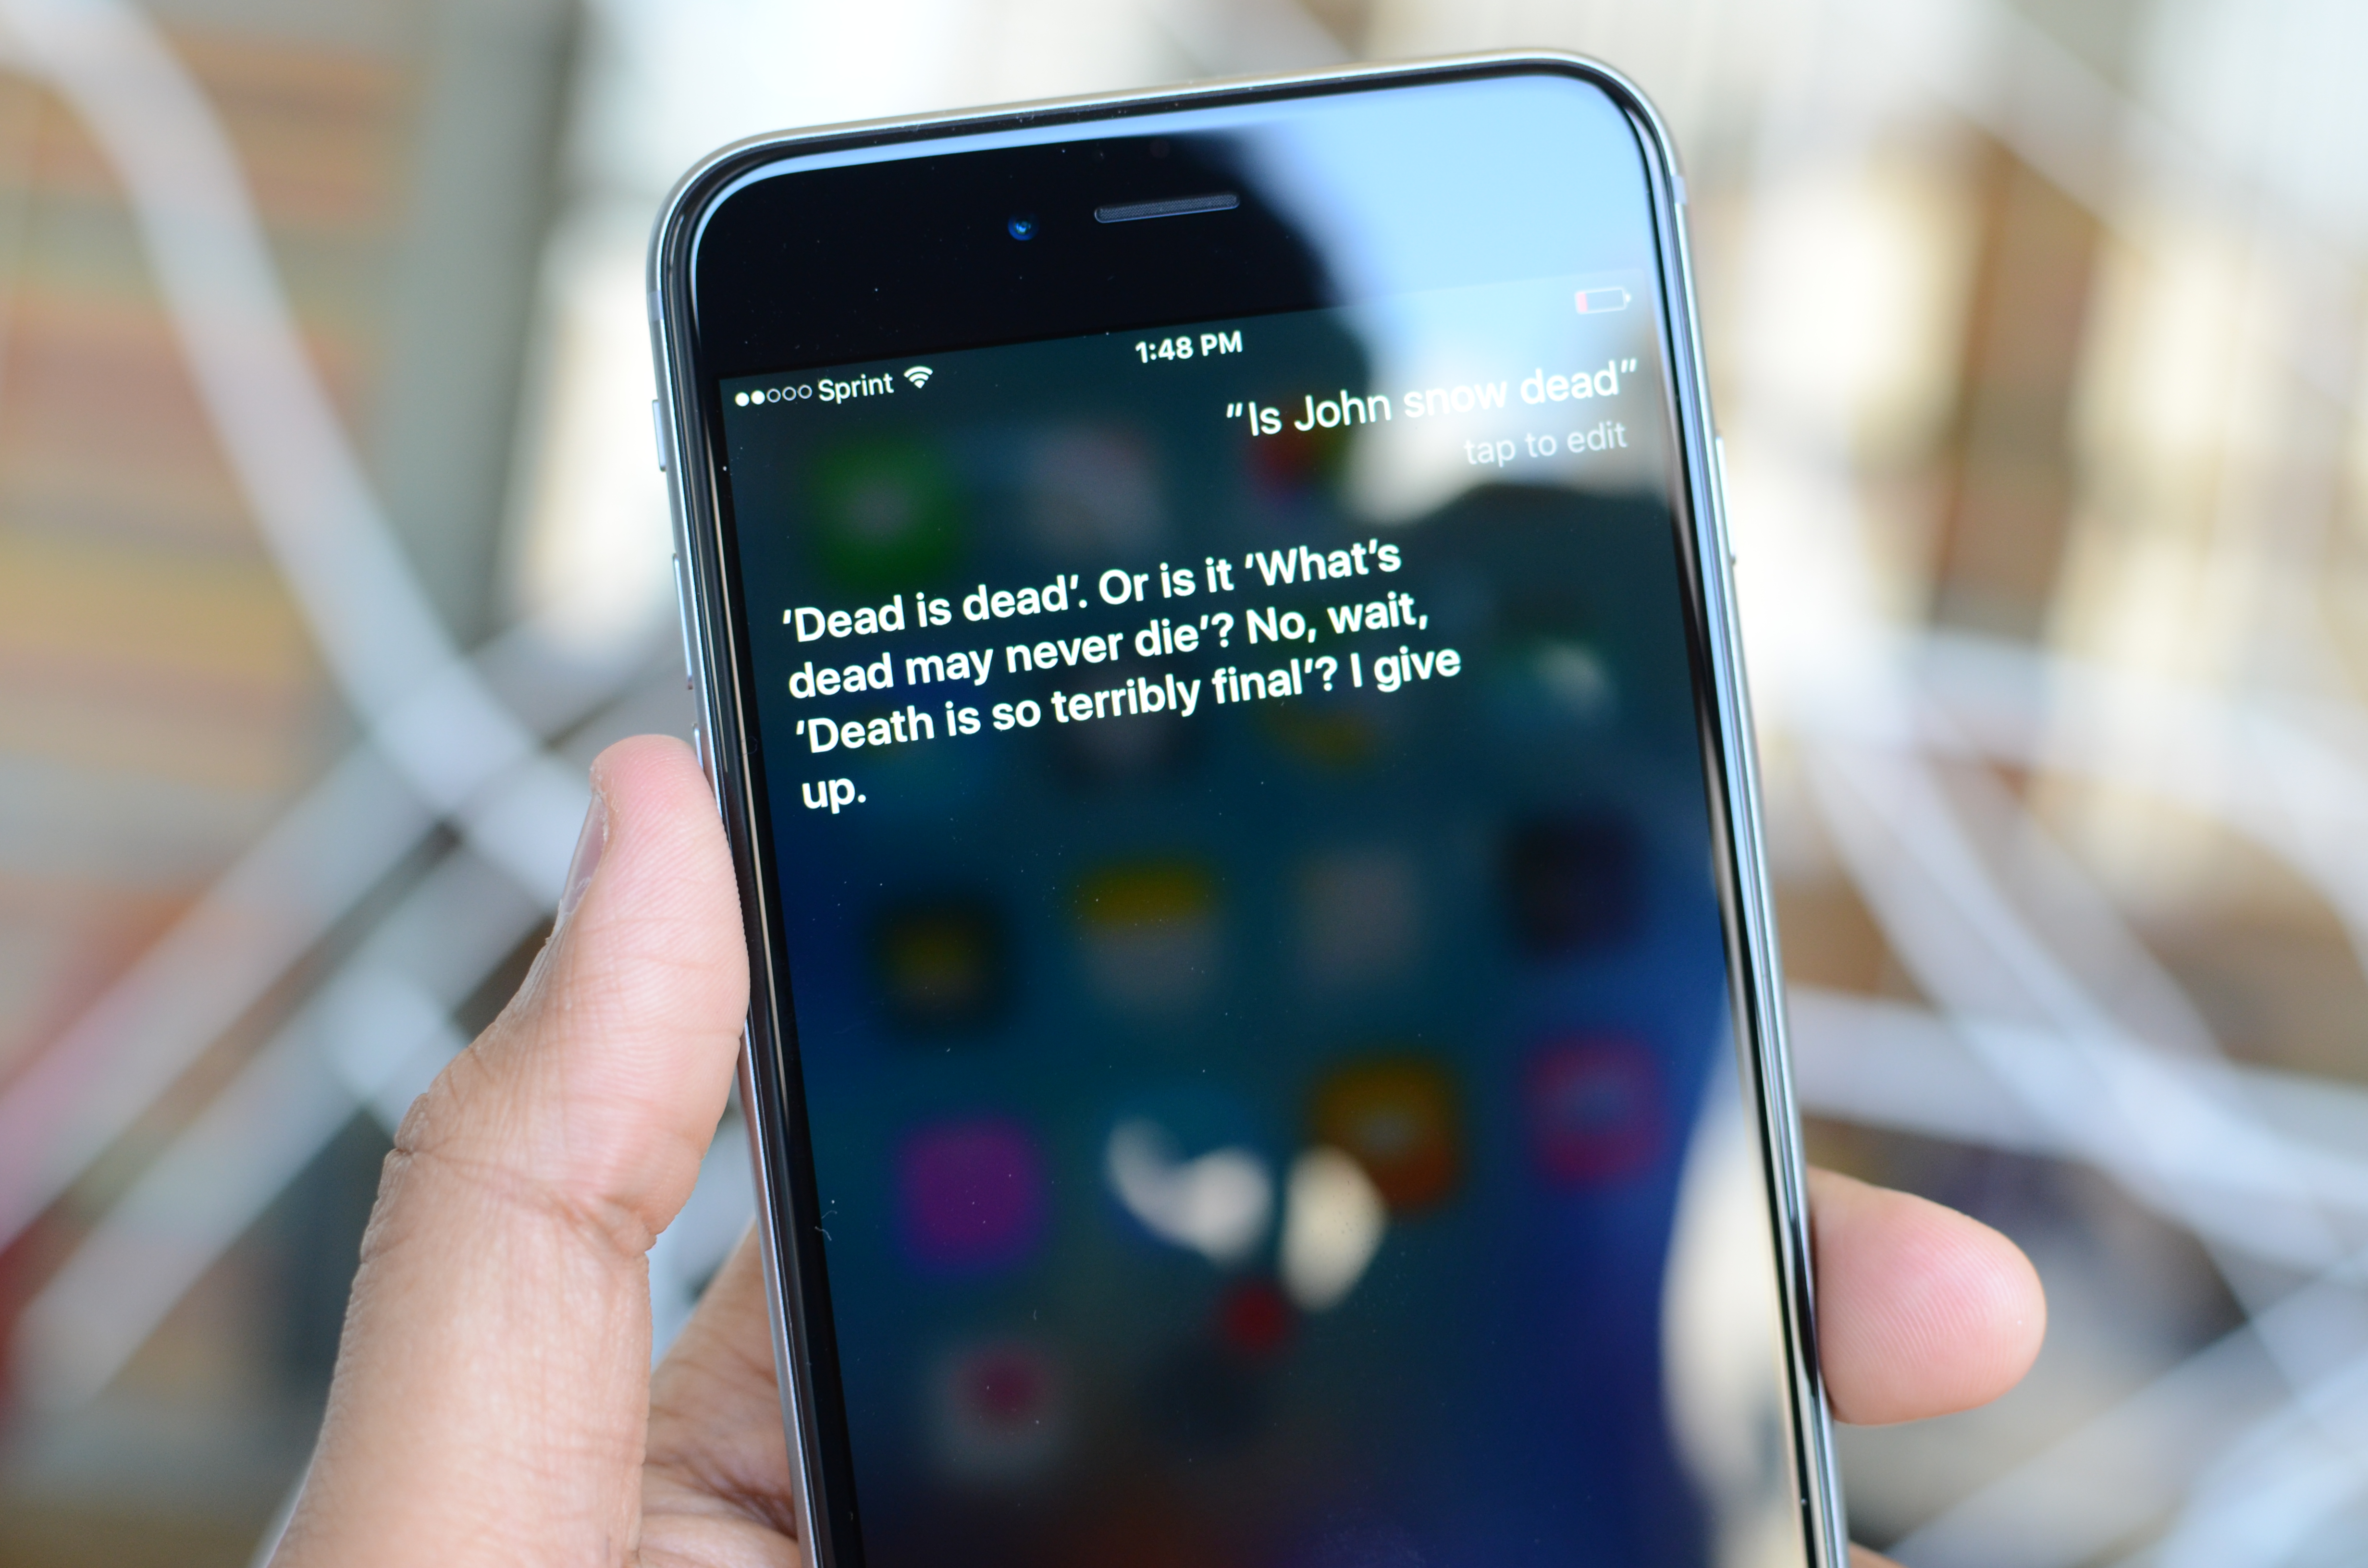 81 Funny Things to Ask Siri: The Funniest Questions | Digital Trends